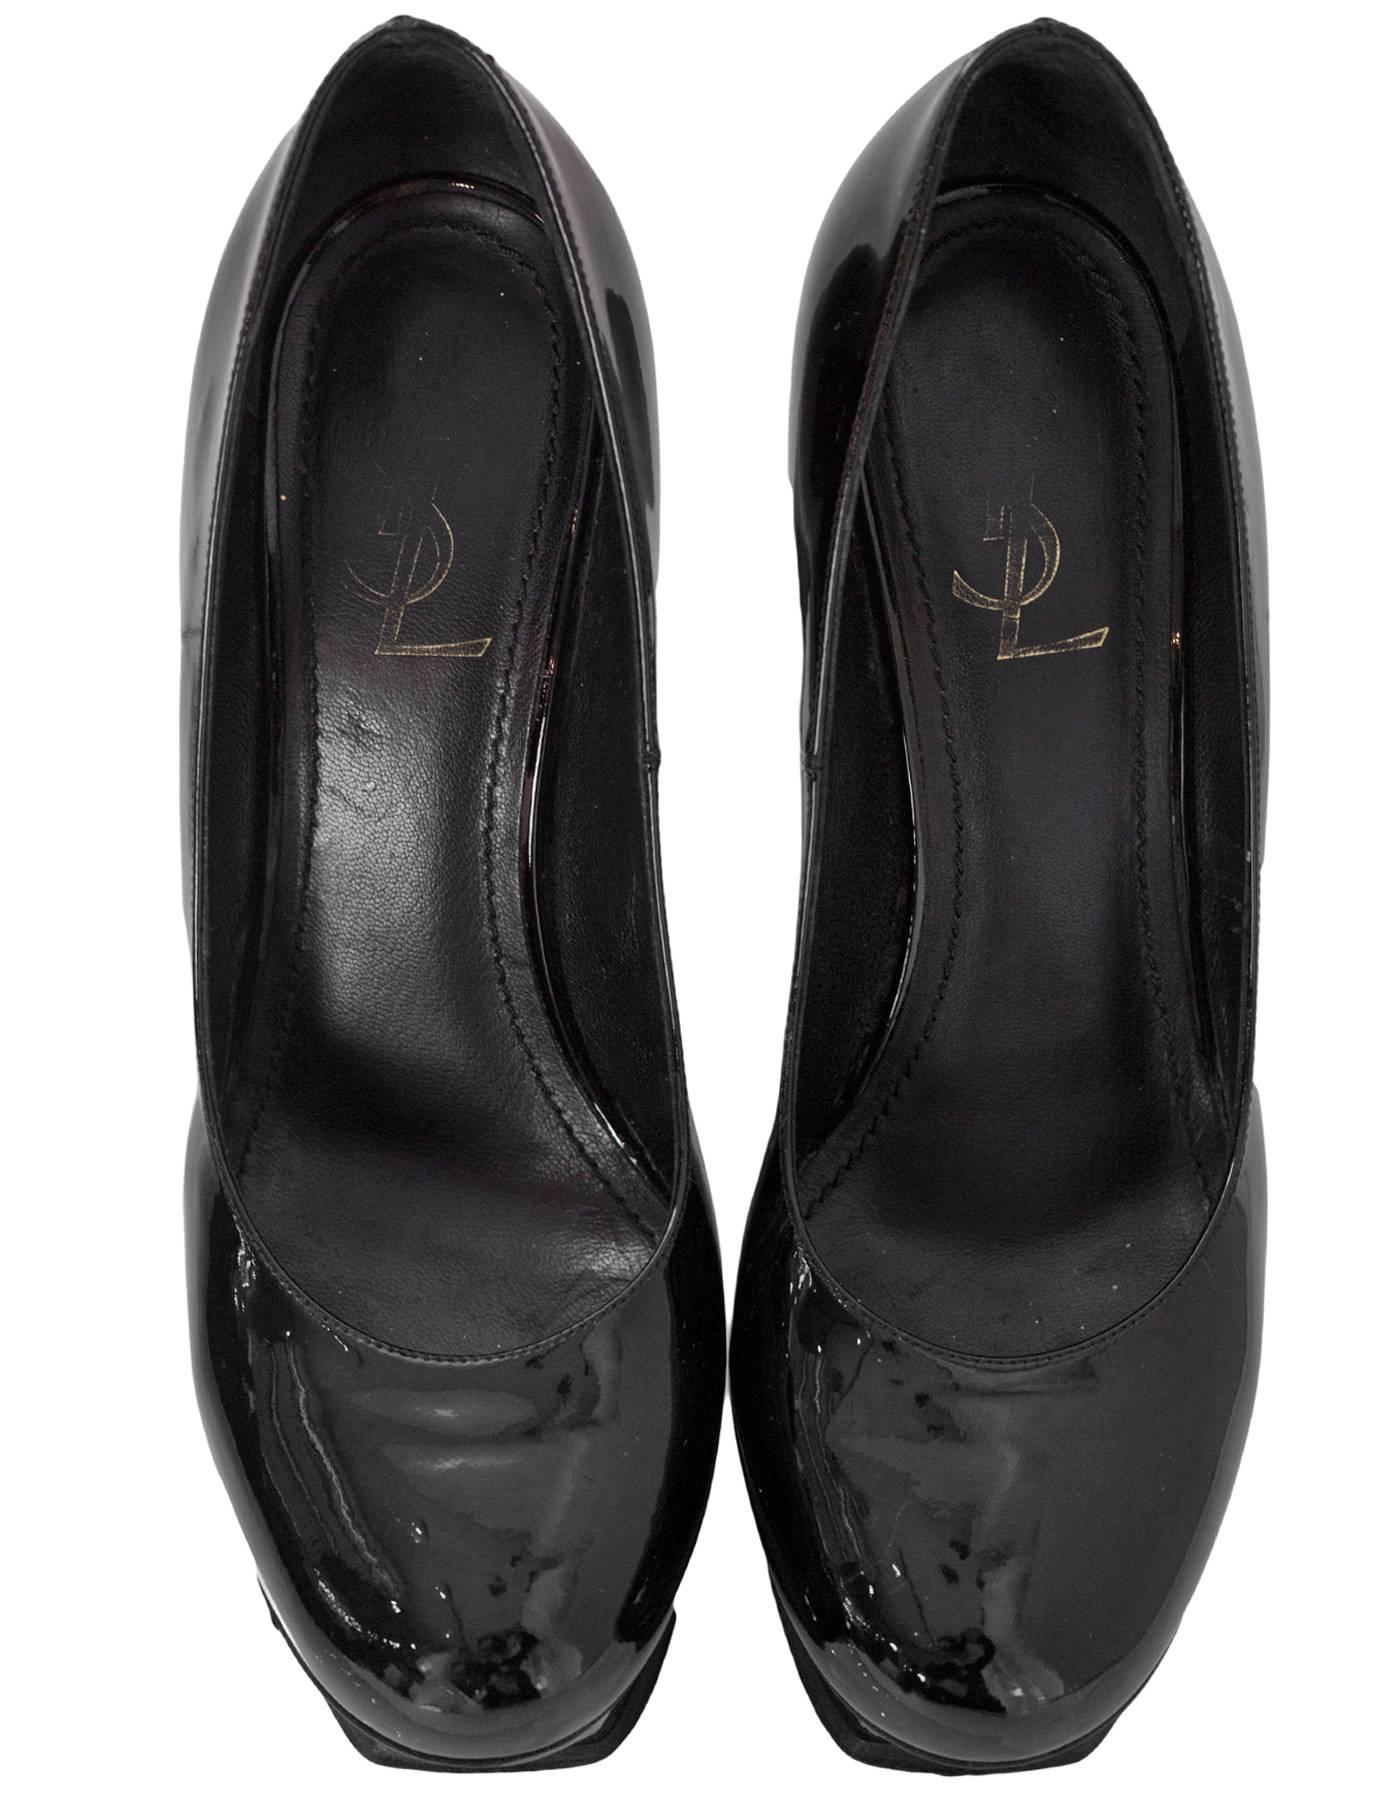 YSL Black Patent Leather Tribute Platform Pumps Sz 39 In Excellent Condition In New York, NY